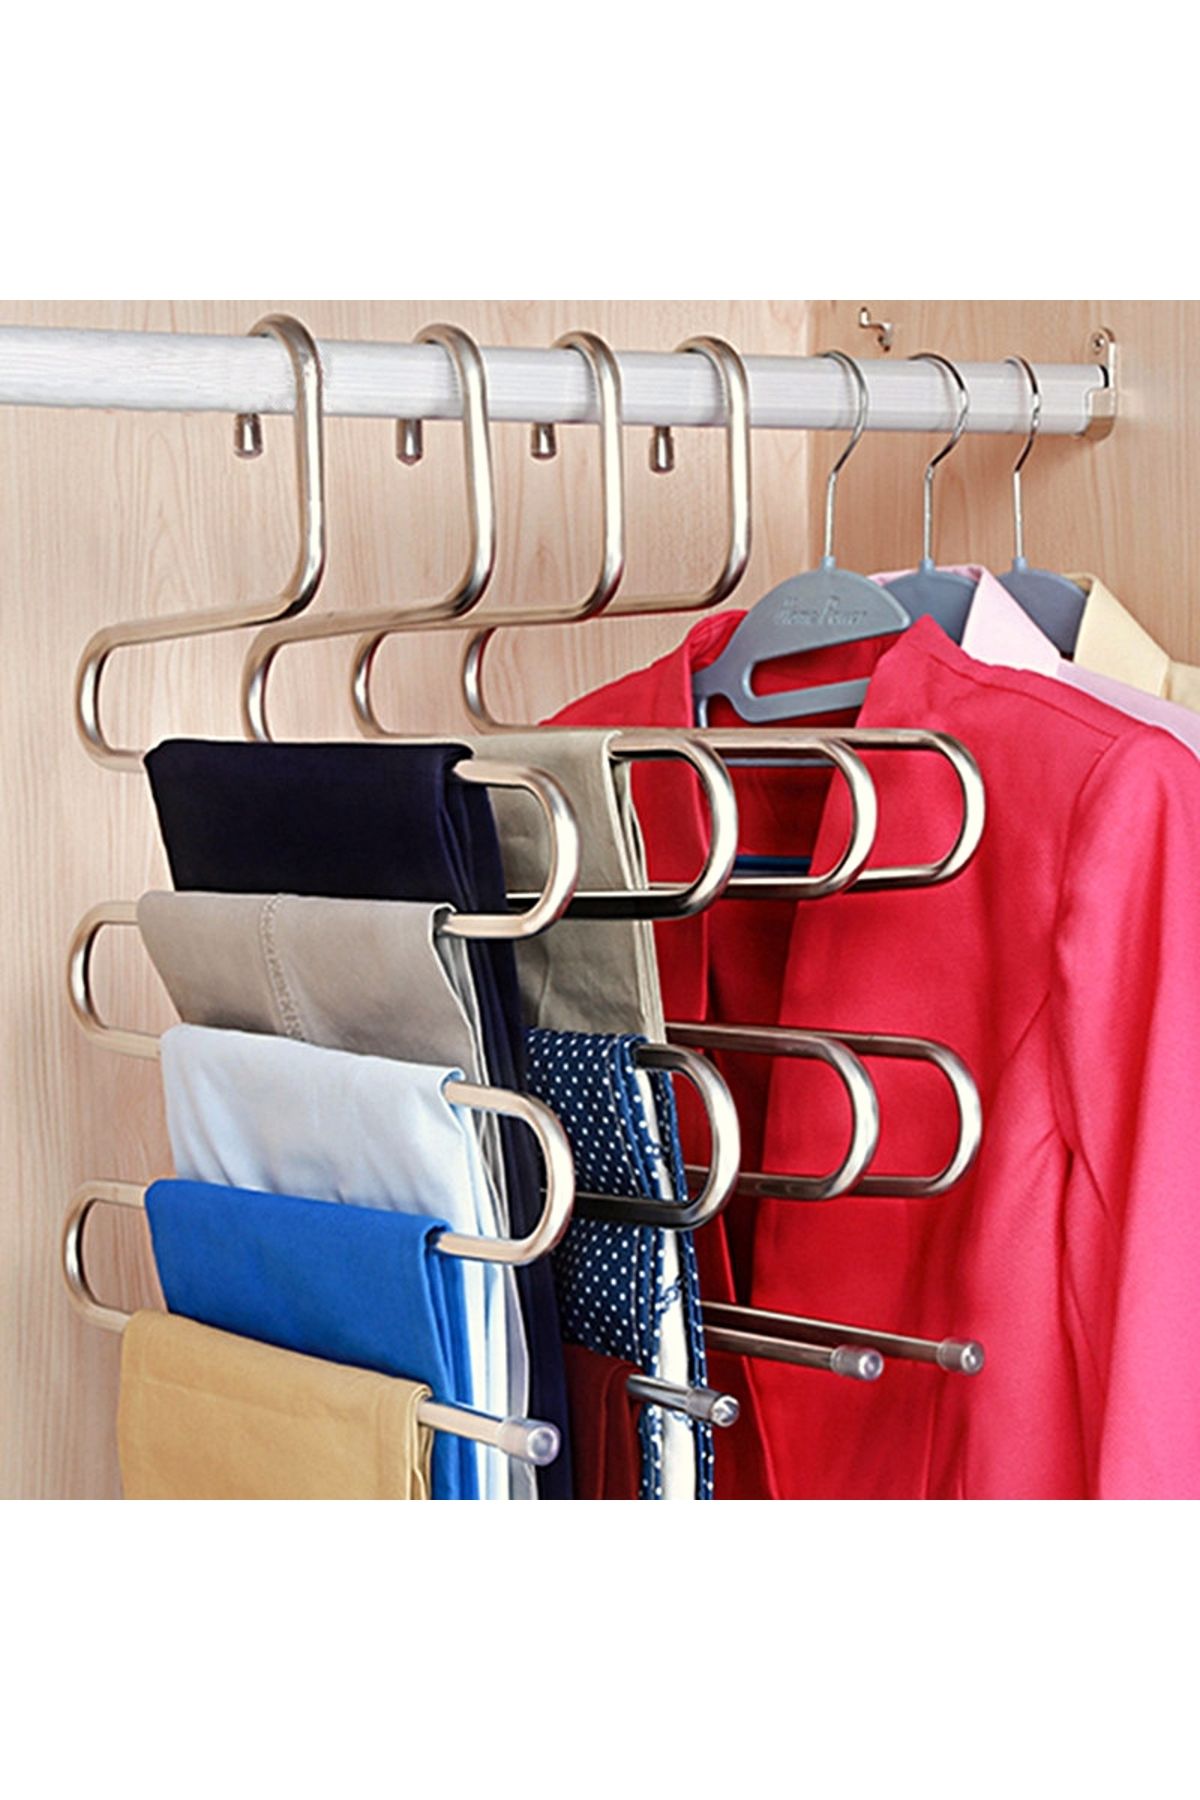 Amazon.com: Trrcylp 2Pack Pants Hangers Space Saving, 9 Layer Collapsible  Trousers Non Slip Stainless Steel Multifunctional Rack Closet Organizer for  Skirts Scarf Jeans Leggings Trousers White : Home & Kitchen